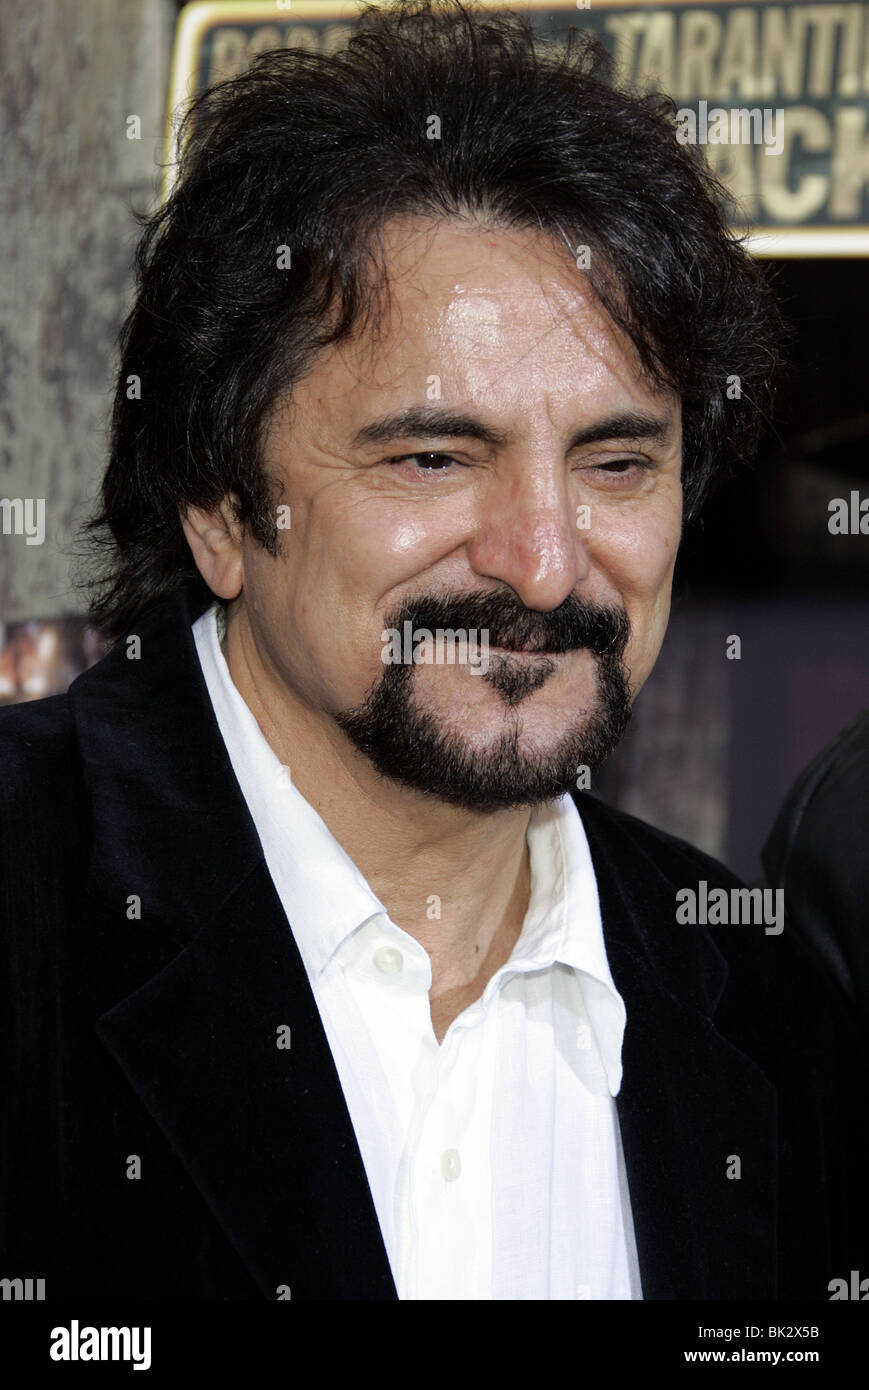 TOM SAVINI GRINDHOUSE FILM PREMIERE DOWNTOWN LOS ANGELES USA 26 March 2007 Stock Photo